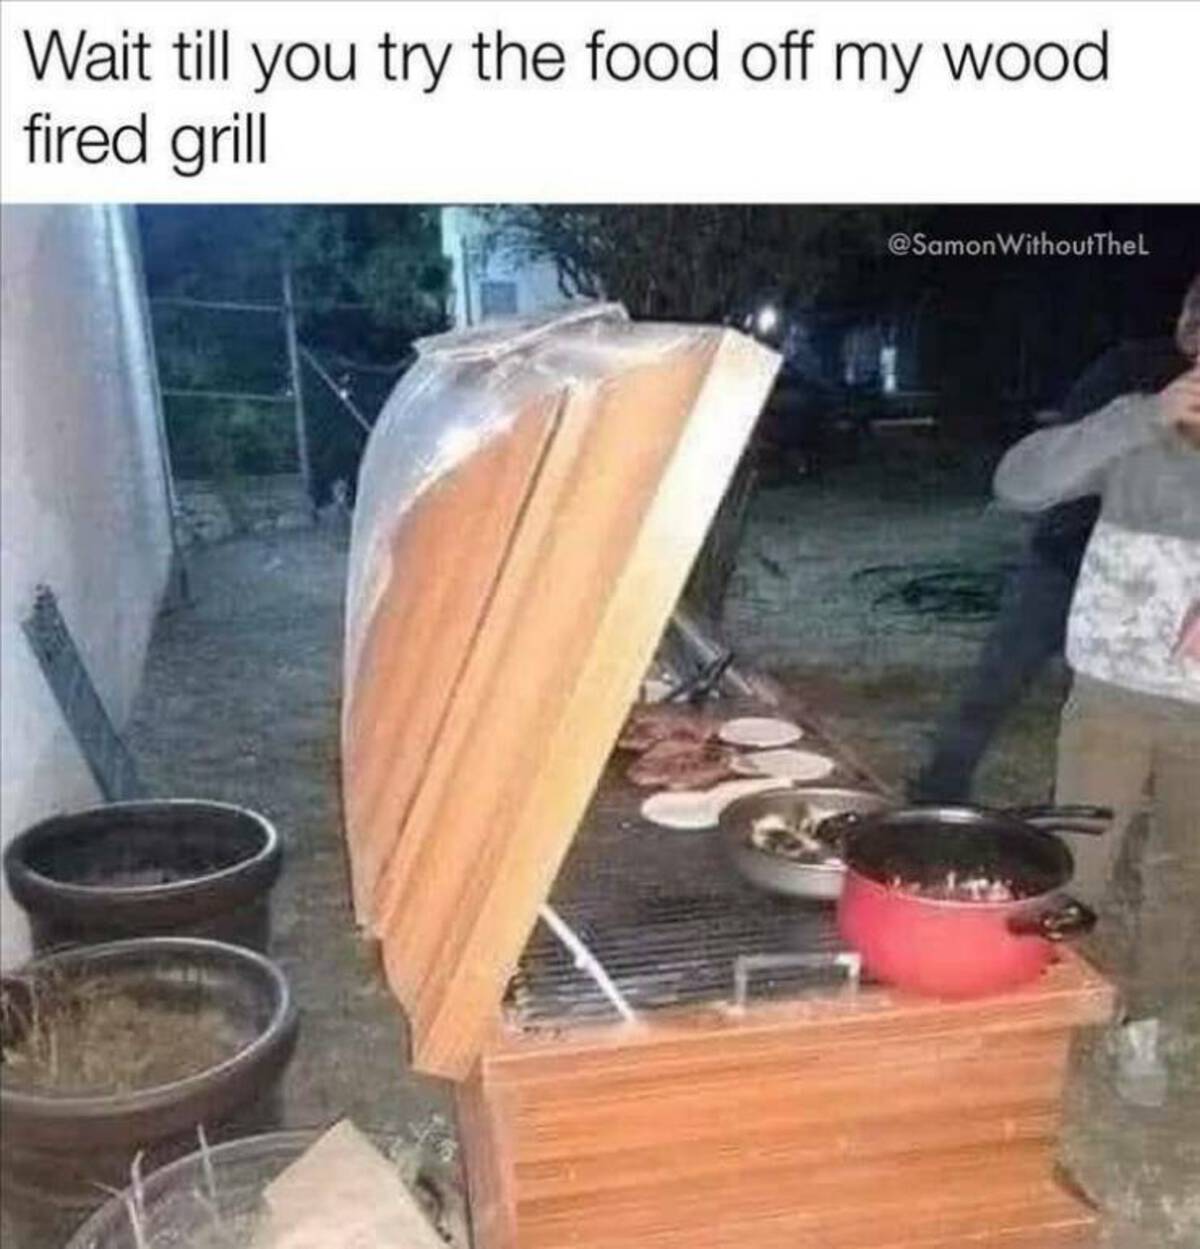 Wait till you try the food off my wood fired grill